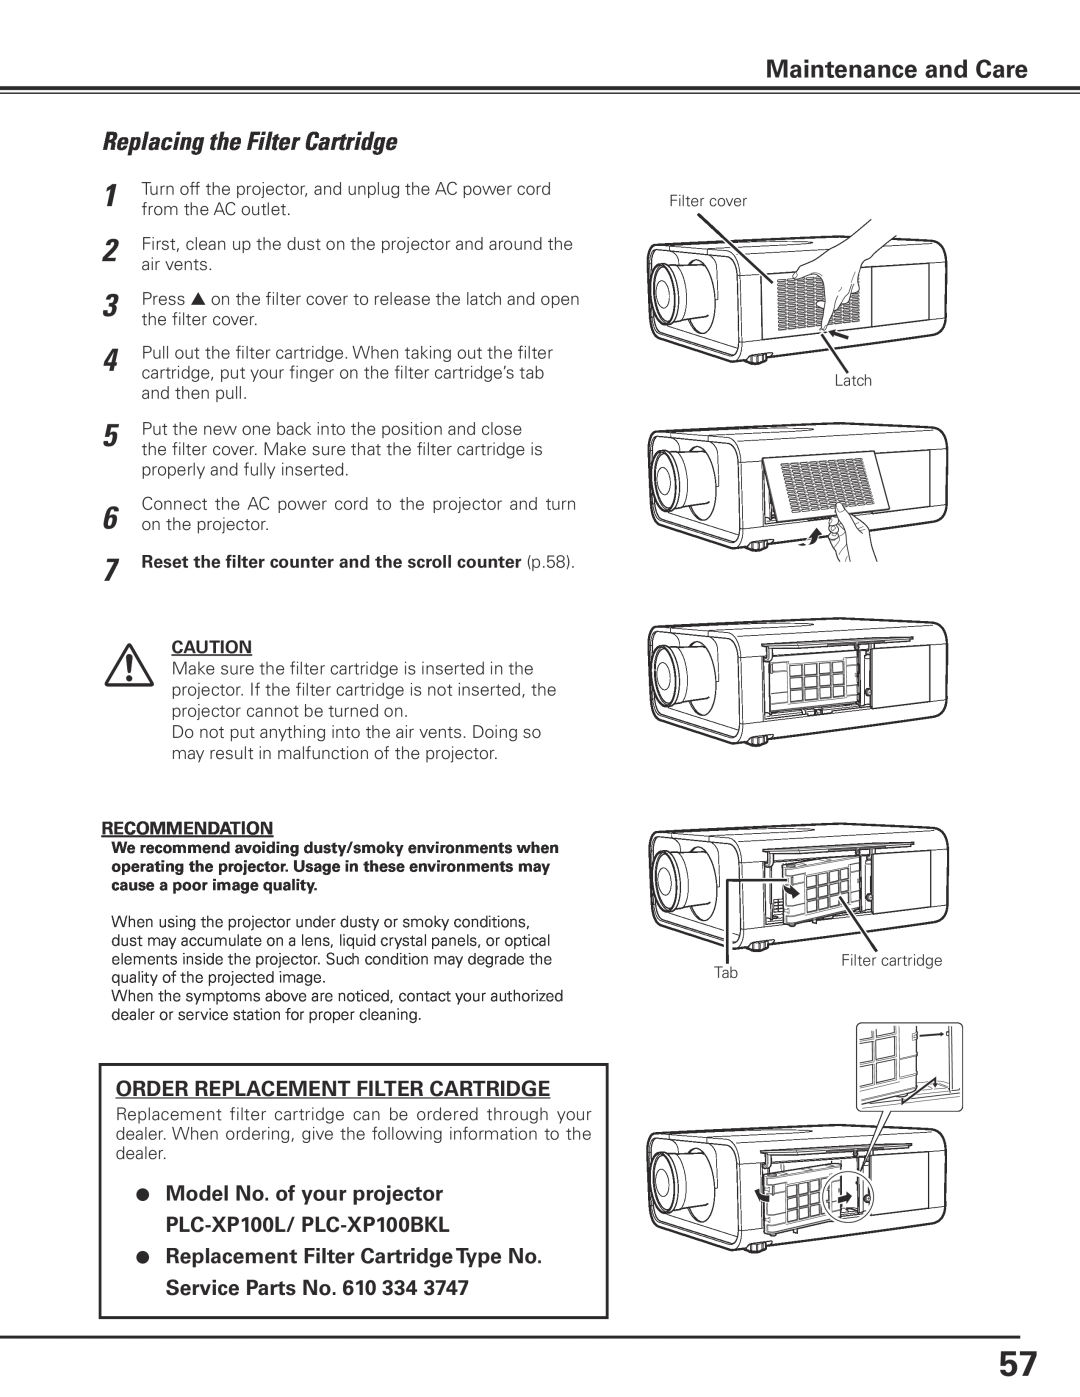 Sanyo PLC-XP100L, PLC-XP100BKL owner manual Maintenance and Care, Filter cover Latch, Filter cartridge 